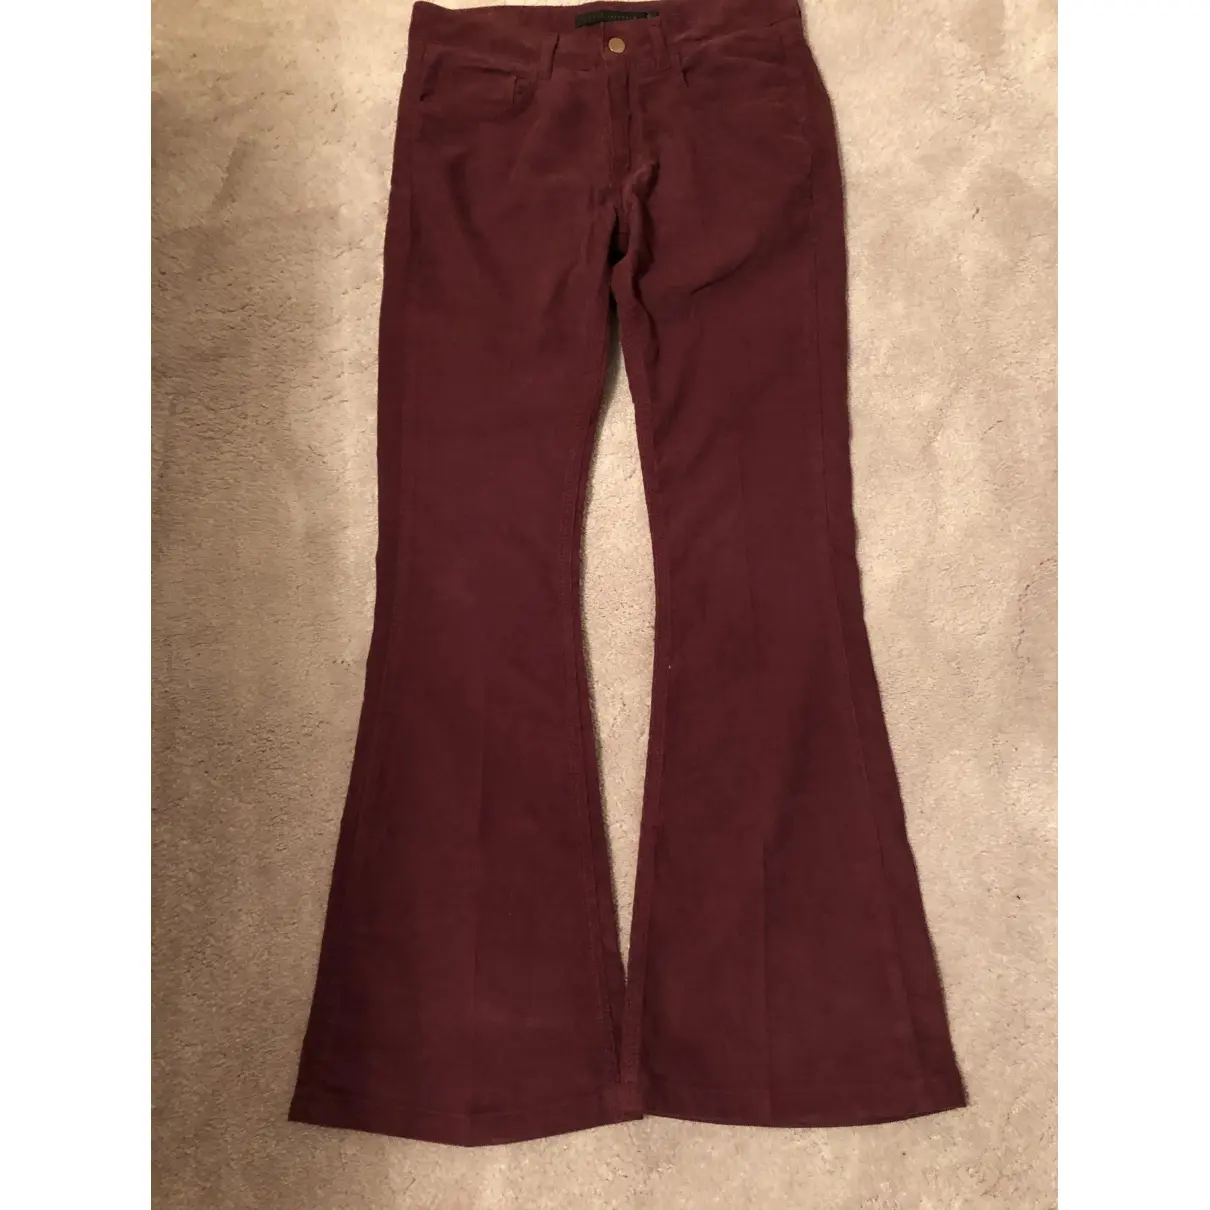 Victoria Beckham Trousers for sale